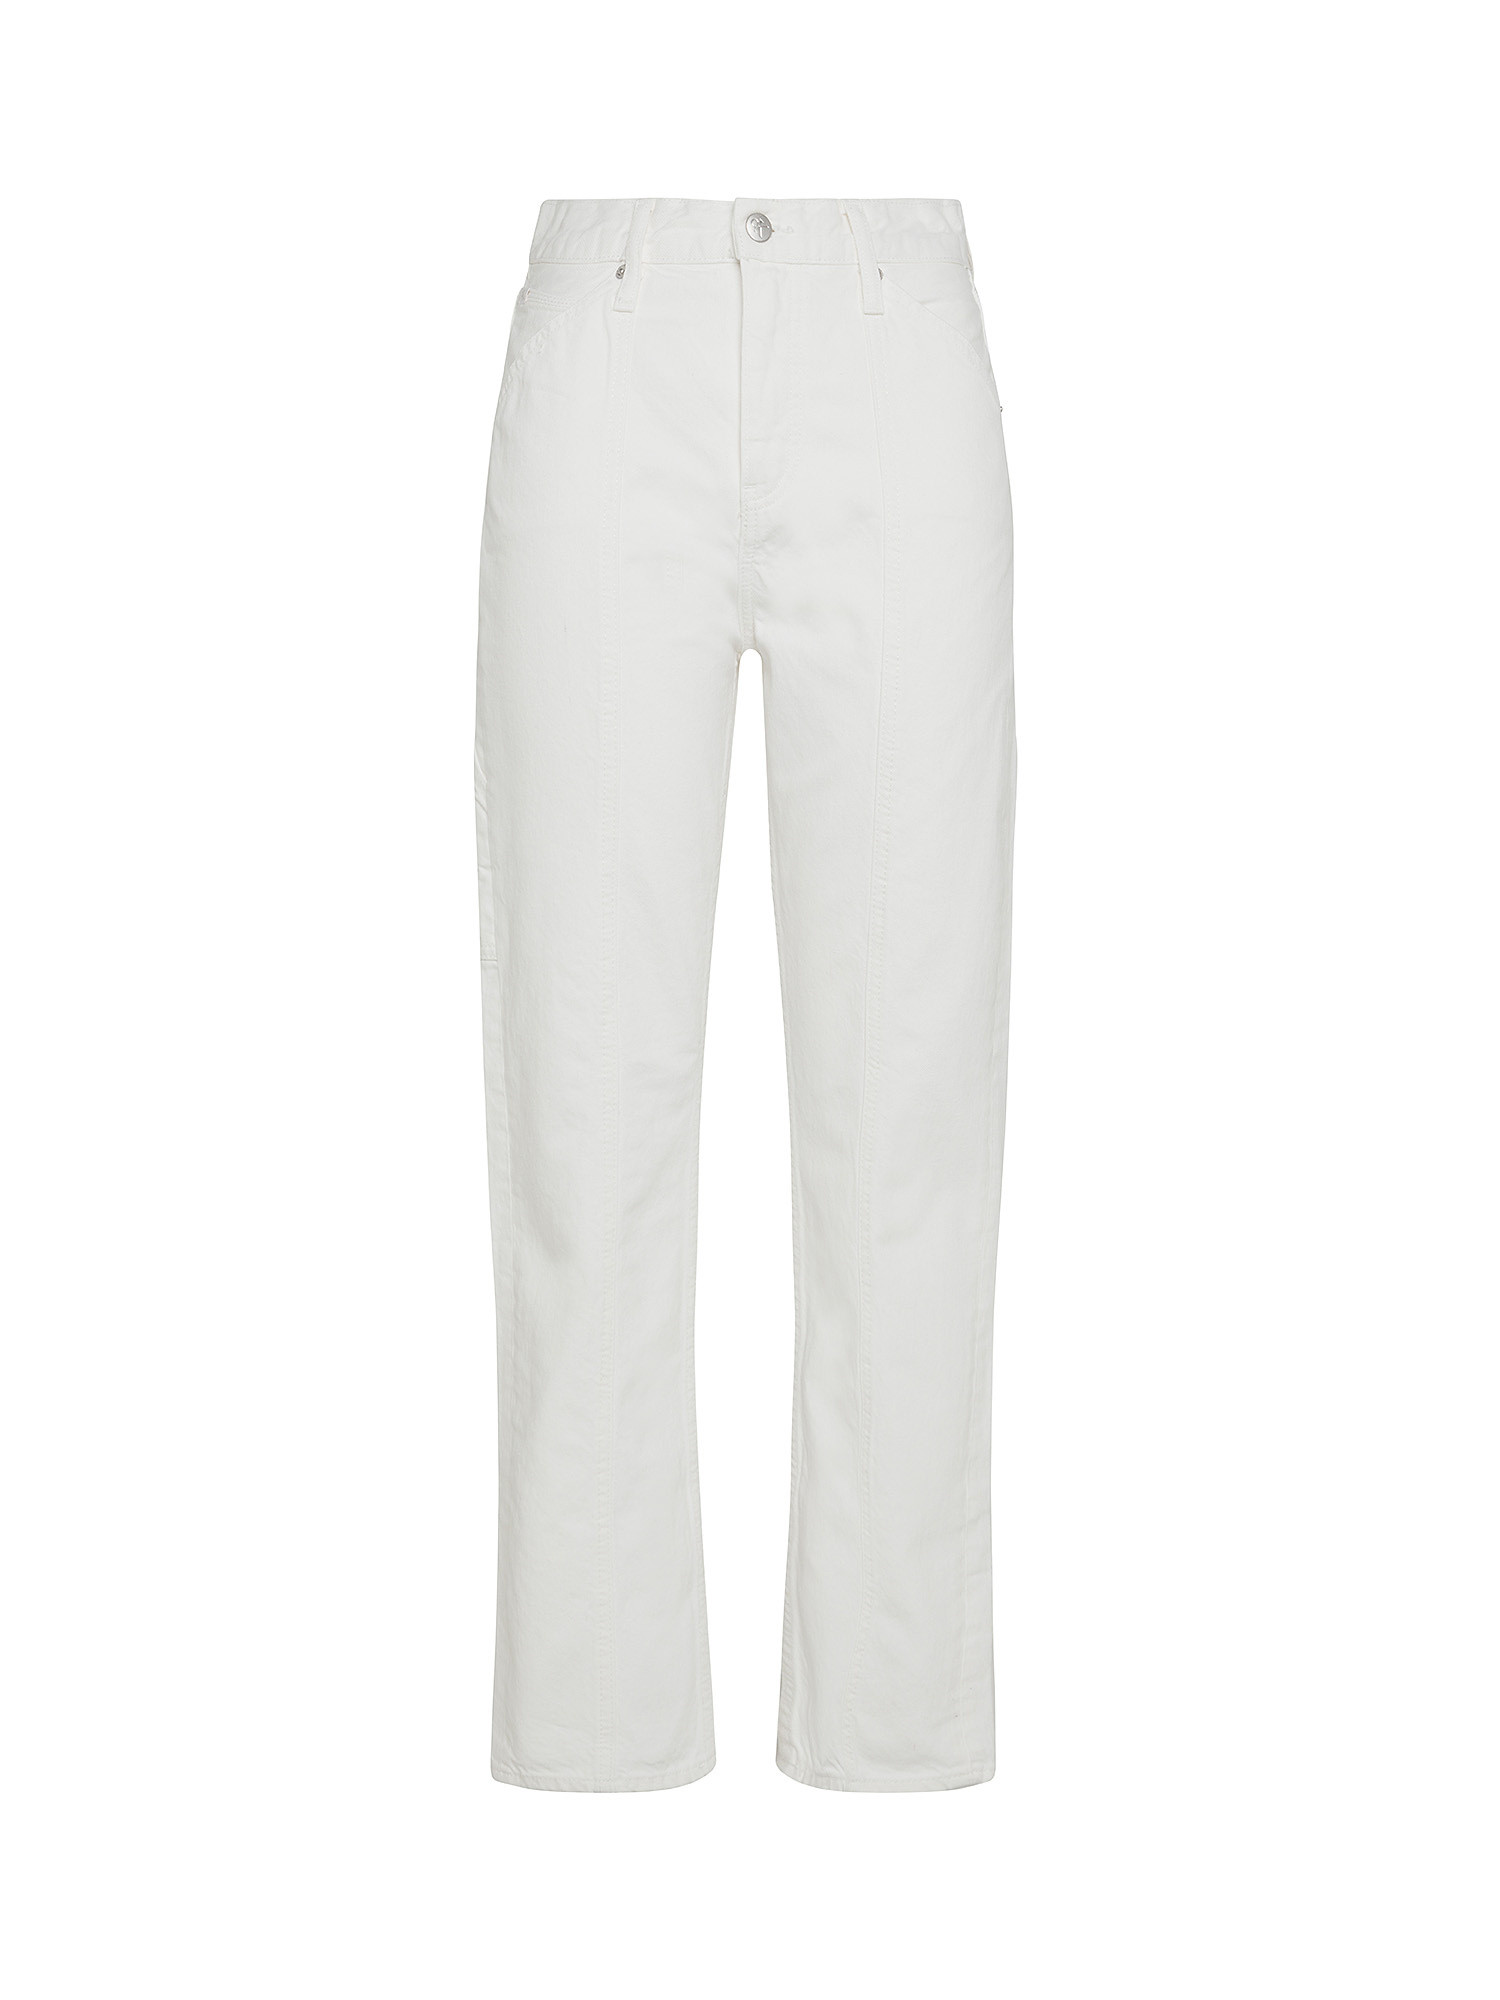 Calvin Klein Jeans - Jeans dritti in cotone, Bianco, large image number 0